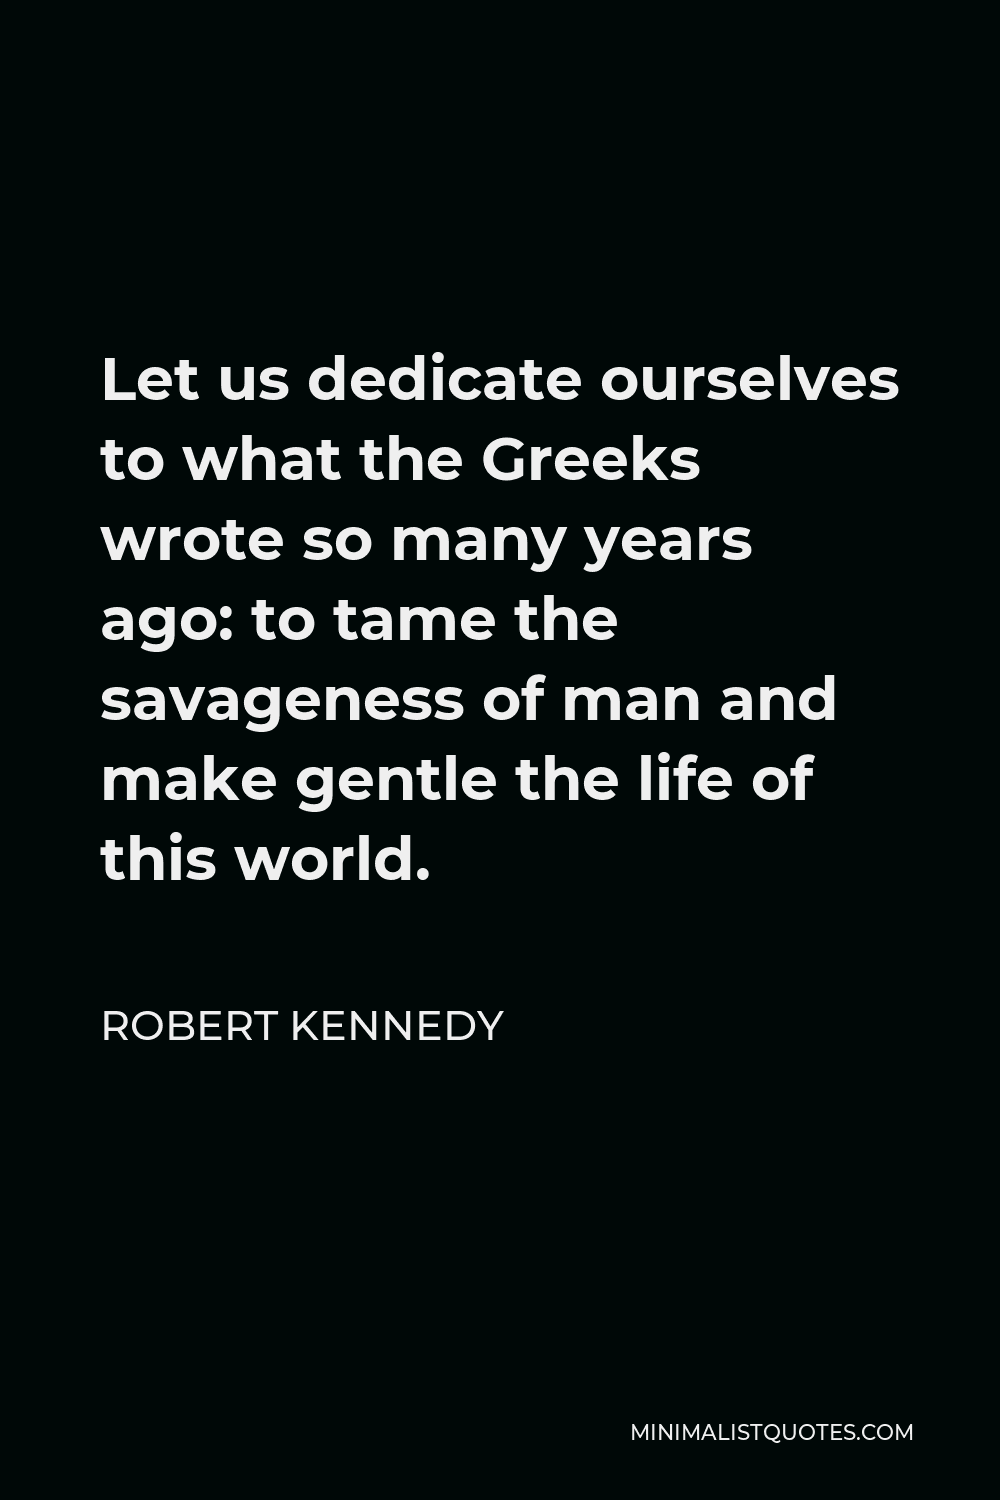 Robert Kennedy Quote - Let us dedicate ourselves to what the Greeks wrote so many years ago: to tame the savageness of man and make gentle the life of this world.